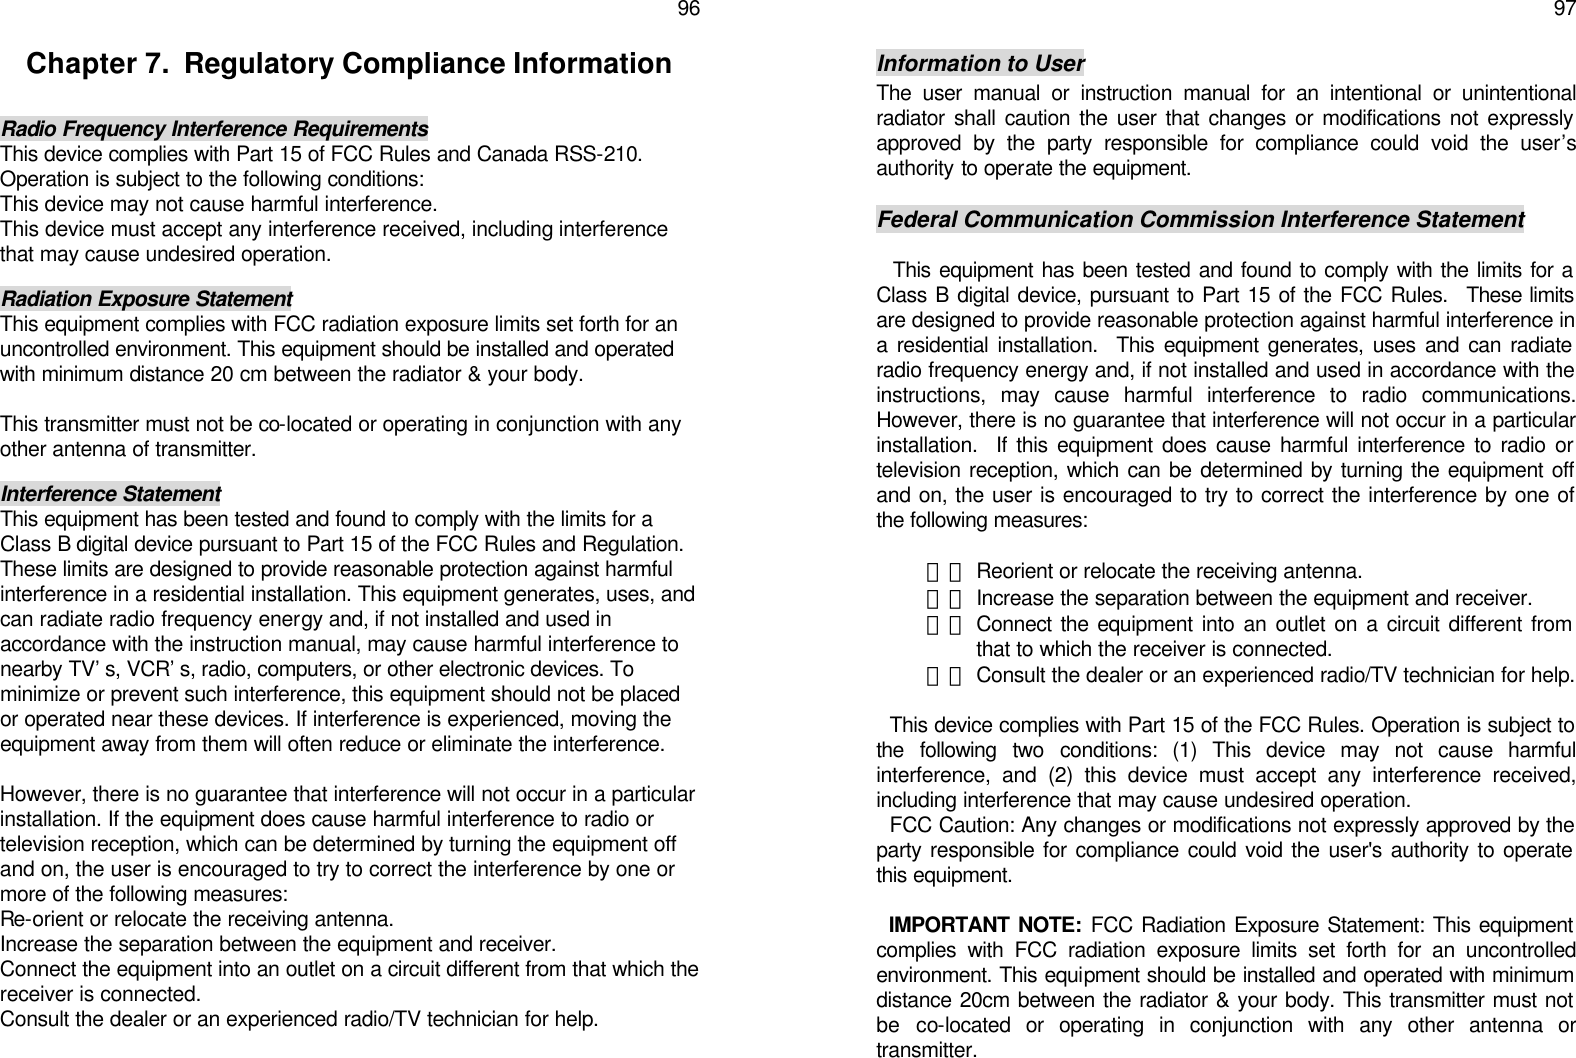   96 Chapter 7.  Regulatory Compliance Information  Radio Frequency Interference Requirements This device complies with Part 15 of FCC Rules and Canada RSS-210. Operation is subject to the following conditions: This device may not cause harmful interference. This device must accept any interference received, including interference that may cause undesired operation.  Radiation Exposure Statement This equipment complies with FCC radiation exposure limits set forth for an uncontrolled environment. This equipment should be installed and operated with minimum distance 20 cm between the radiator &amp; your body.  This transmitter must not be co-located or operating in conjunction with any other antenna of transmitter.  Interference Statement This equipment has been tested and found to comply with the limits for a Class B digital device pursuant to Part 15 of the FCC Rules and Regulation. These limits are designed to provide reasonable protection against harmful interference in a residential installation. This equipment generates, uses, and can radiate radio frequency energy and, if not installed and used in accordance with the instruction manual, may cause harmful interference to nearby TV’s, VCR’s, radio, computers, or other electronic devices. To minimize or prevent such interference, this equipment should not be placed or operated near these devices. If interference is experienced, moving the equipment away from them will often reduce or eliminate the interference.  However, there is no guarantee that interference will not occur in a particular installation. If the equipment does cause harmful interference to radio or television reception, which can be determined by turning the equipment off and on, the user is encouraged to try to correct the interference by one or more of the following measures: Re-orient or relocate the receiving antenna. Increase the separation between the equipment and receiver. Connect the equipment into an outlet on a circuit different from that which the receiver is connected. Consult the dealer or an experienced radio/TV technician for help.    97  Information to User The user manual or instruction manual for an intentional or unintentional radiator shall caution the user that changes or modifications not expressly approved by the party responsible for compliance could void the user’s authority to operate the equipment.  Federal Communication Commission Interference Statement    This equipment has been tested and found to comply with the limits for a Class B digital device, pursuant to Part 15 of the FCC Rules.  These limits are designed to provide reasonable protection against harmful interference in a residential installation.  This equipment generates, uses and can radiate radio frequency energy and, if not installed and used in accordance with the instructions, may cause harmful interference to radio communications.  However, there is no guarantee that interference will not occur in a particular installation.  If this equipment does cause harmful interference to radio or television reception, which can be determined by turning the equipment off and on, the user is encouraged to try to correct the interference by one of the following measures:  甲、 Reorient or relocate the receiving antenna. 乙、 Increase the separation between the equipment and receiver. 丙、 Connect the equipment into an outlet on a circuit different from that to which the receiver is connected.  丁、 Consult the dealer or an experienced radio/TV technician for help.    This device complies with Part 15 of the FCC Rules. Operation is subject to the following two conditions: (1) This device may not cause harmful interference, and (2) this device must accept any interference received, including interference that may cause undesired operation.   FCC Caution: Any changes or modifications not expressly approved by the party responsible for compliance could void the user&apos;s authority to operate this equipment.    IMPORTANT NOTE: FCC Radiation Exposure Statement: This equipment complies with FCC radiation exposure limits set forth for an uncontrolled environment. This equipment should be installed and operated with minimum distance 20cm between the radiator &amp; your body. This transmitter must not be co-located or operating in conjunction with any other antenna or transmitter. 